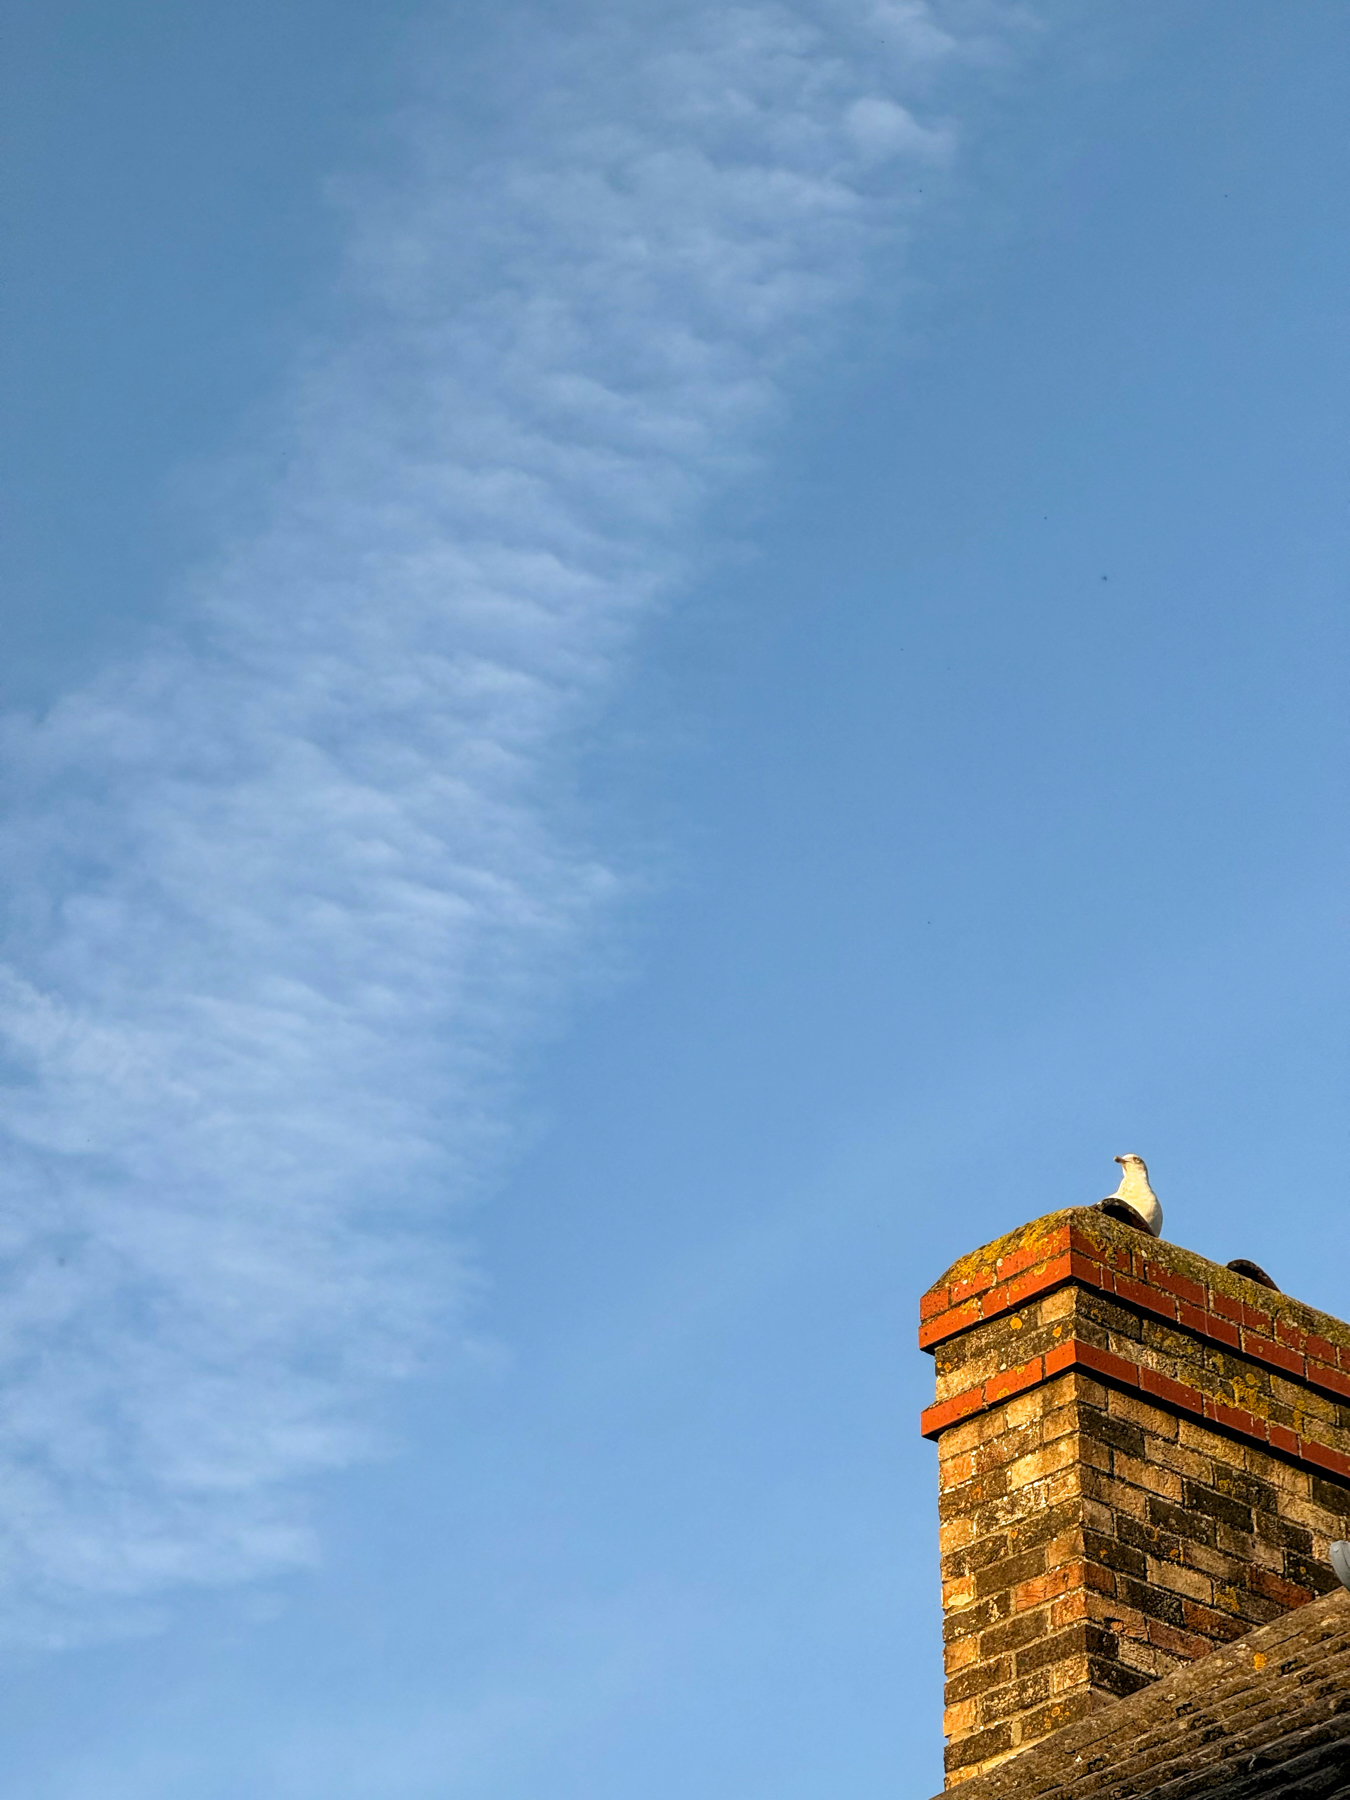 A seagull sat on the chimney of a red brick house